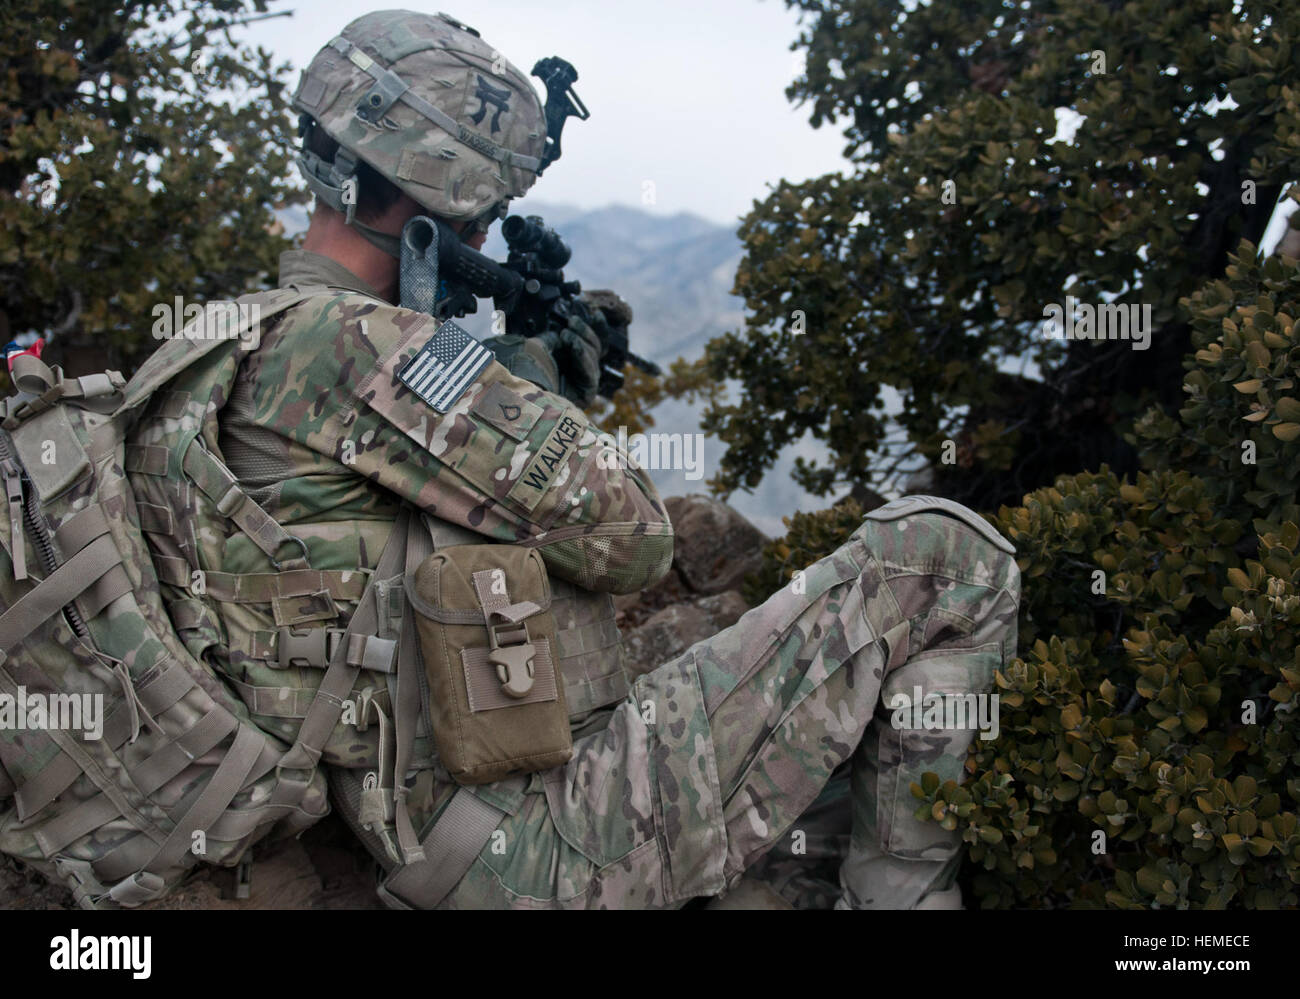 U.S. Army Pfc. Brandon Walker, a cavalry scout with the 3rd Platoon, Alpha Troop, 1st Squadron, 33rd Cavalry Regiment, 3rd Brigade, 101st Airborne Division (Air Assault), provides over-watch security on top of a mountain during a patrol in Paktya province, Afghanistan, Feb. 13, 2013. The platoon conducted a patrol to disrupt enemy positions near Combat Outpost Wilderness. (U.S. Army photo by Spc. Alex Kirk Amen/Released)eased) Rakkasans take the high ground 130213-A-NS855-005 Stock Photo